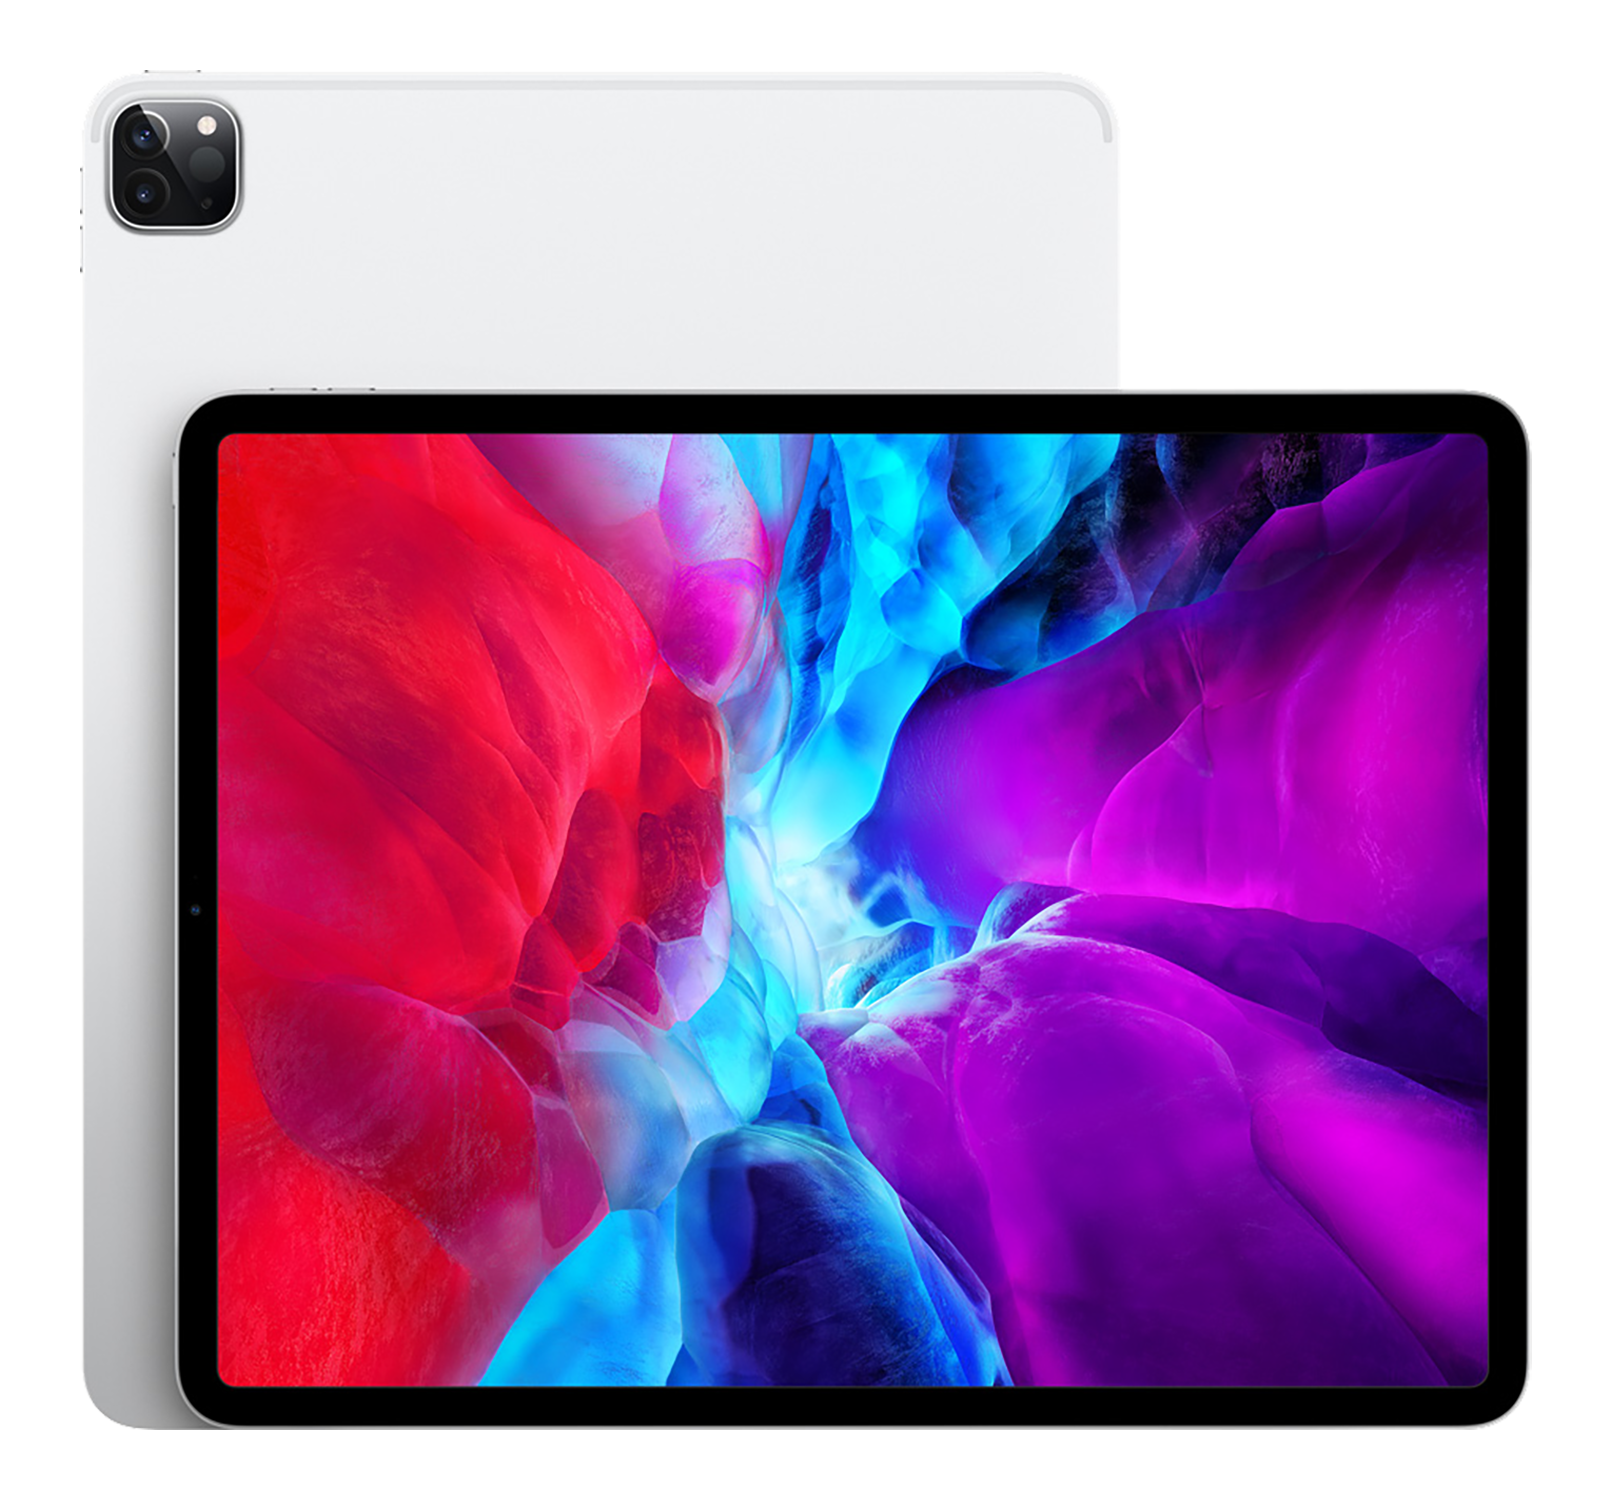 Apple iPad Pro 11-inch front and back view